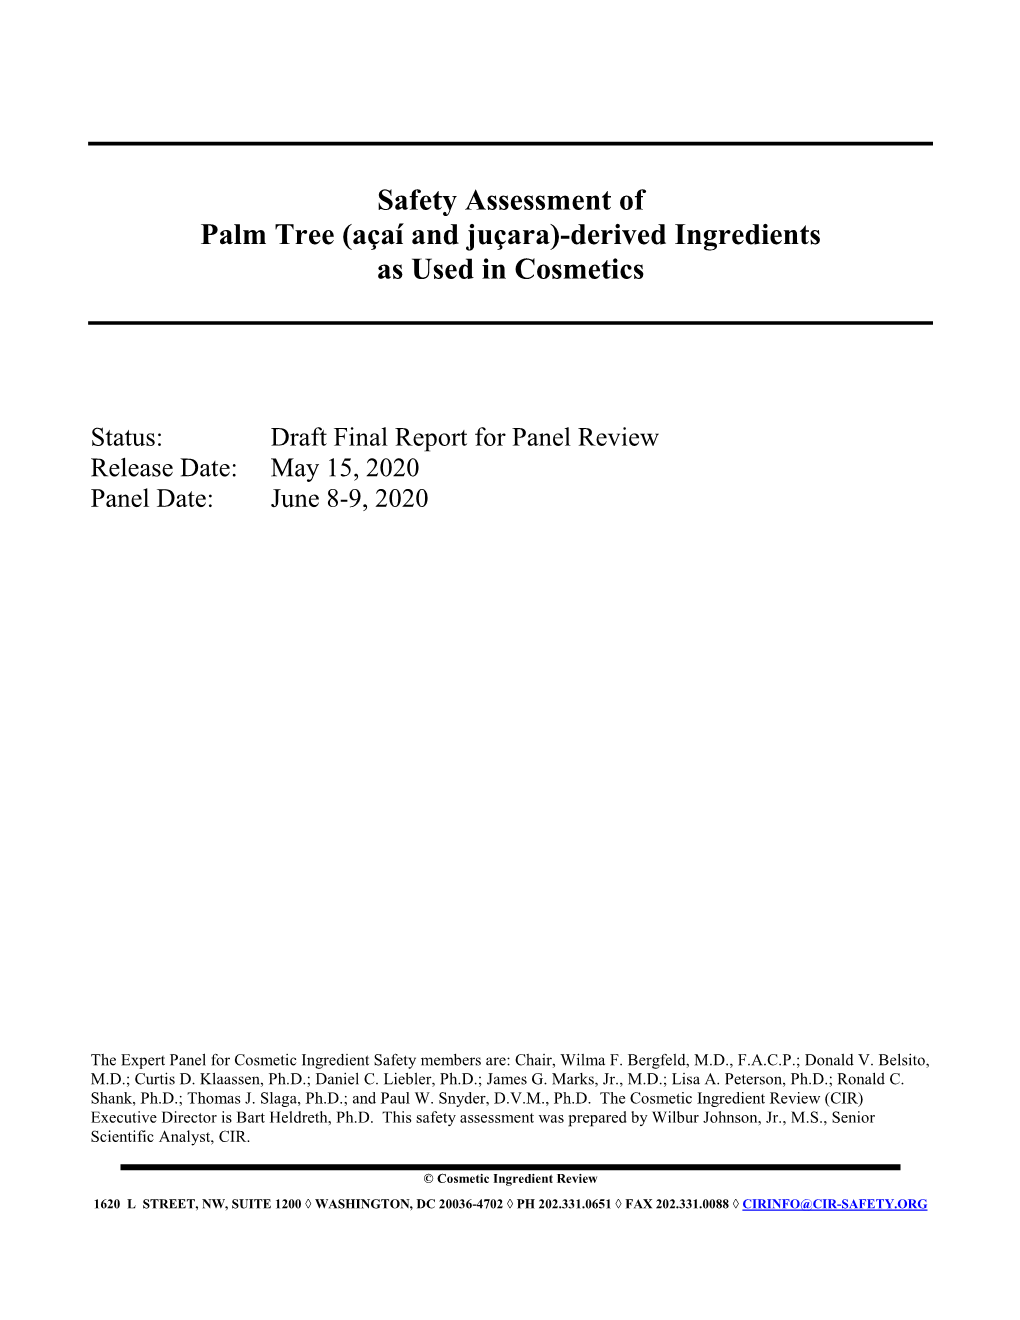 Safety Assessment of Palm Tree (Açaí and Juçara)-Derived Ingredients As Used in Cosmetics